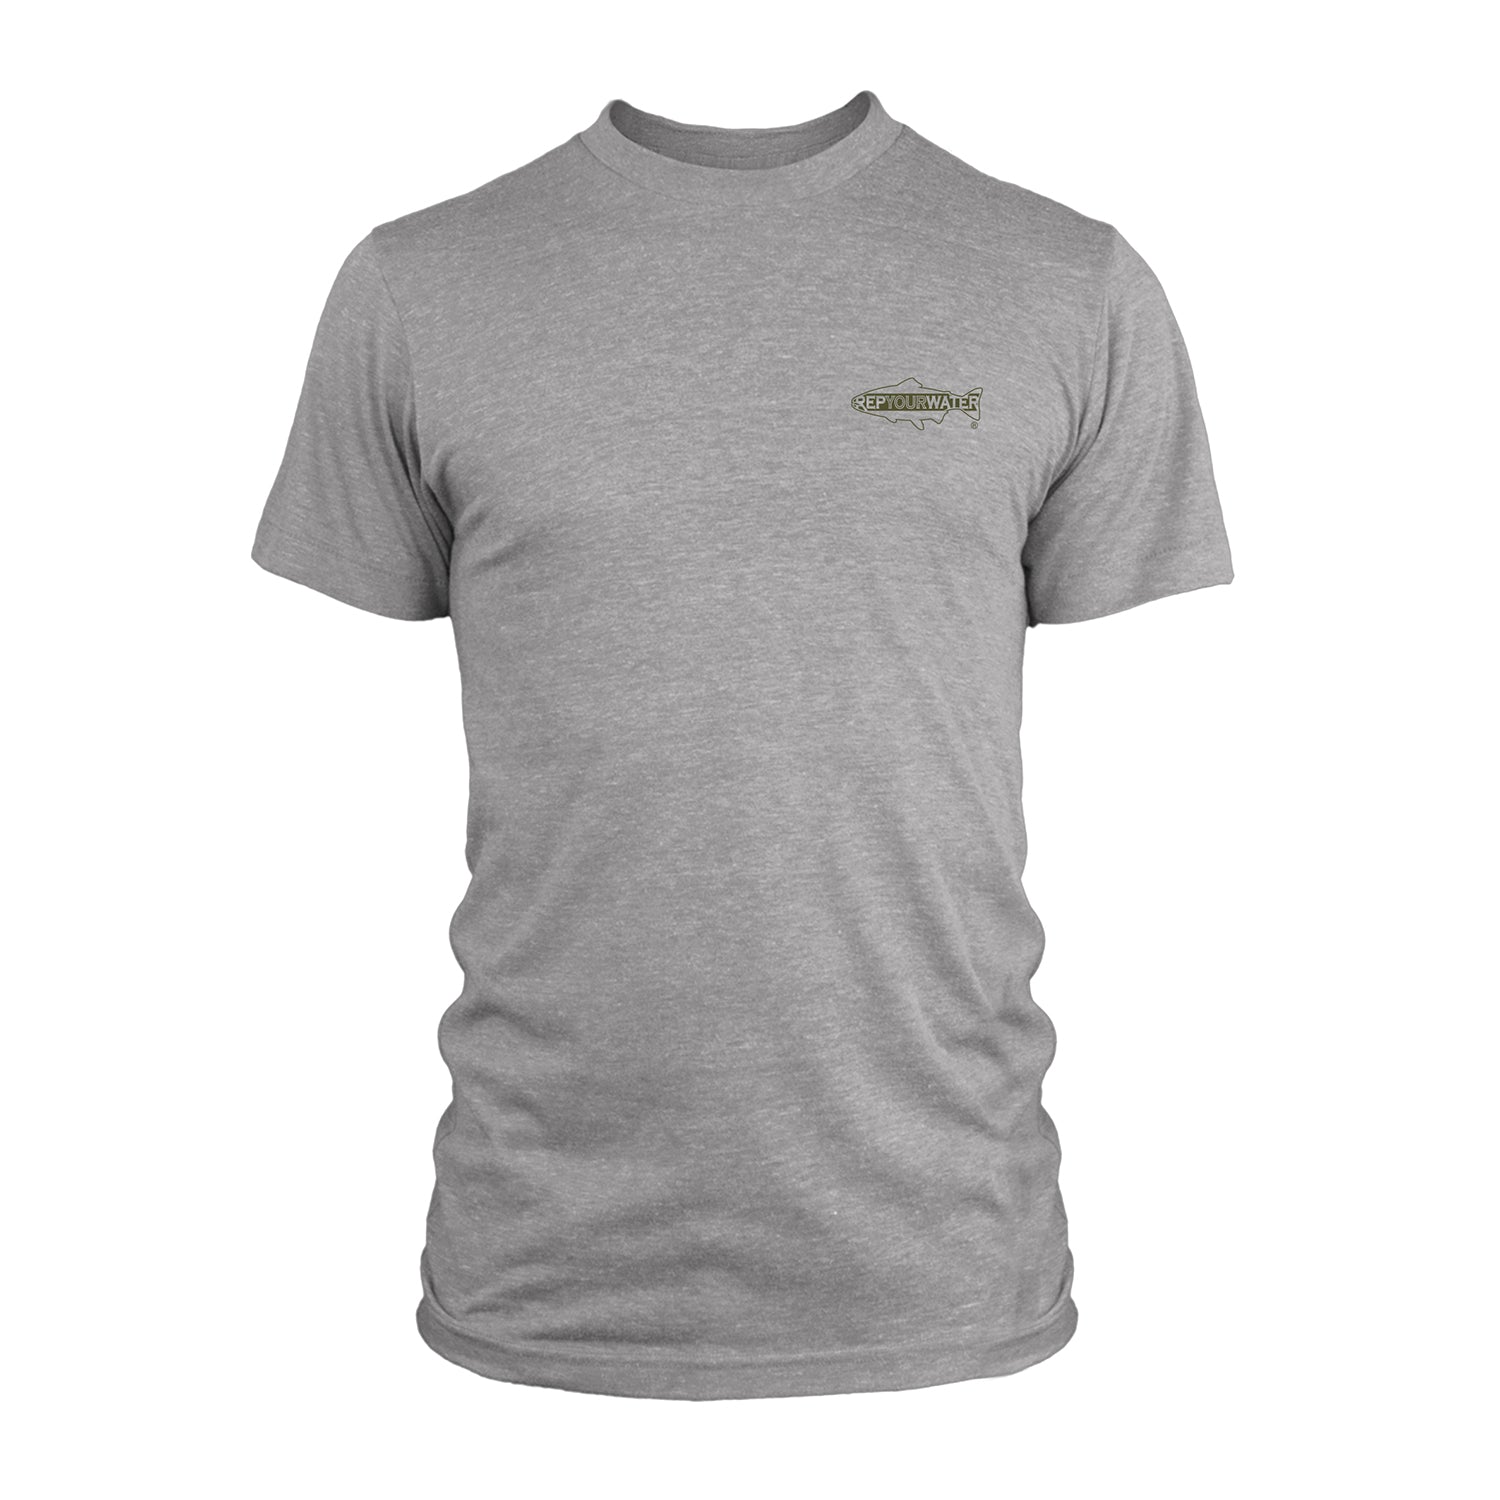 A gray short sleeved tee shirt has a logo on the chest that says repyourwater inside a trout silhouette